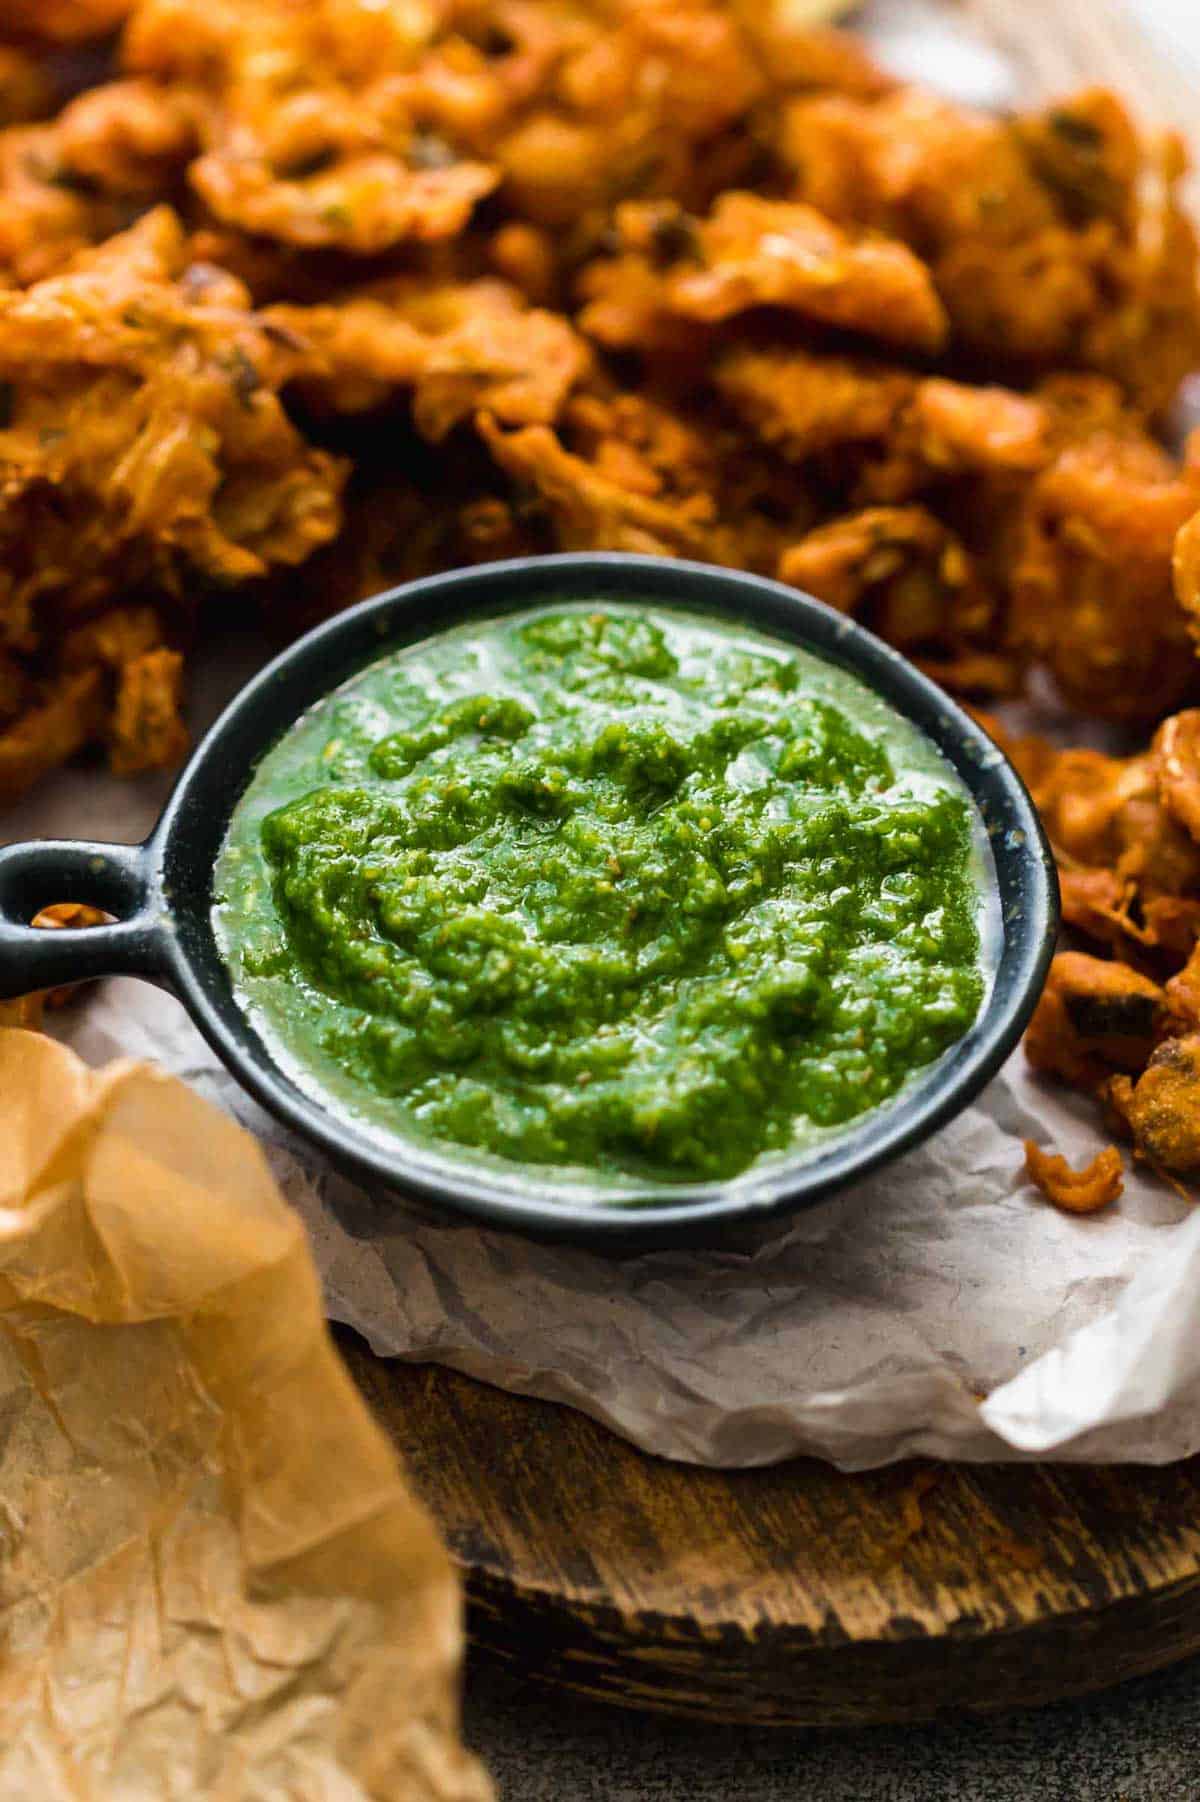 Green Cilantro Chutney served with pakoras or fritters on the side.